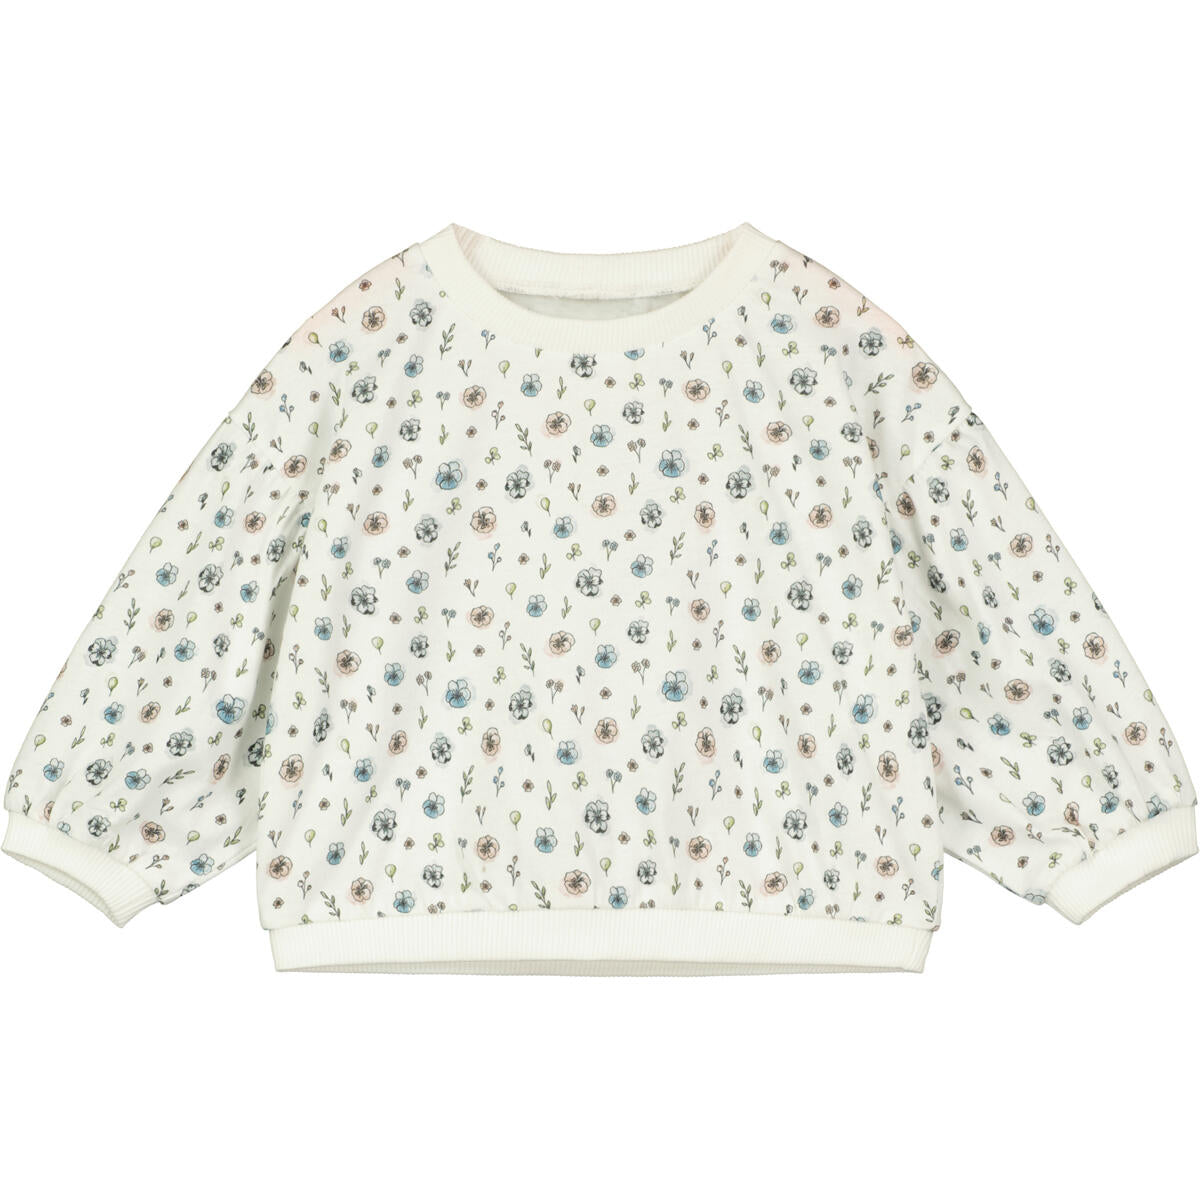 Ettie and H Terry sweatshirt, white with pink and blue florals, cotton, dressy sweats, little girl, toddler, baby girl, lightweight